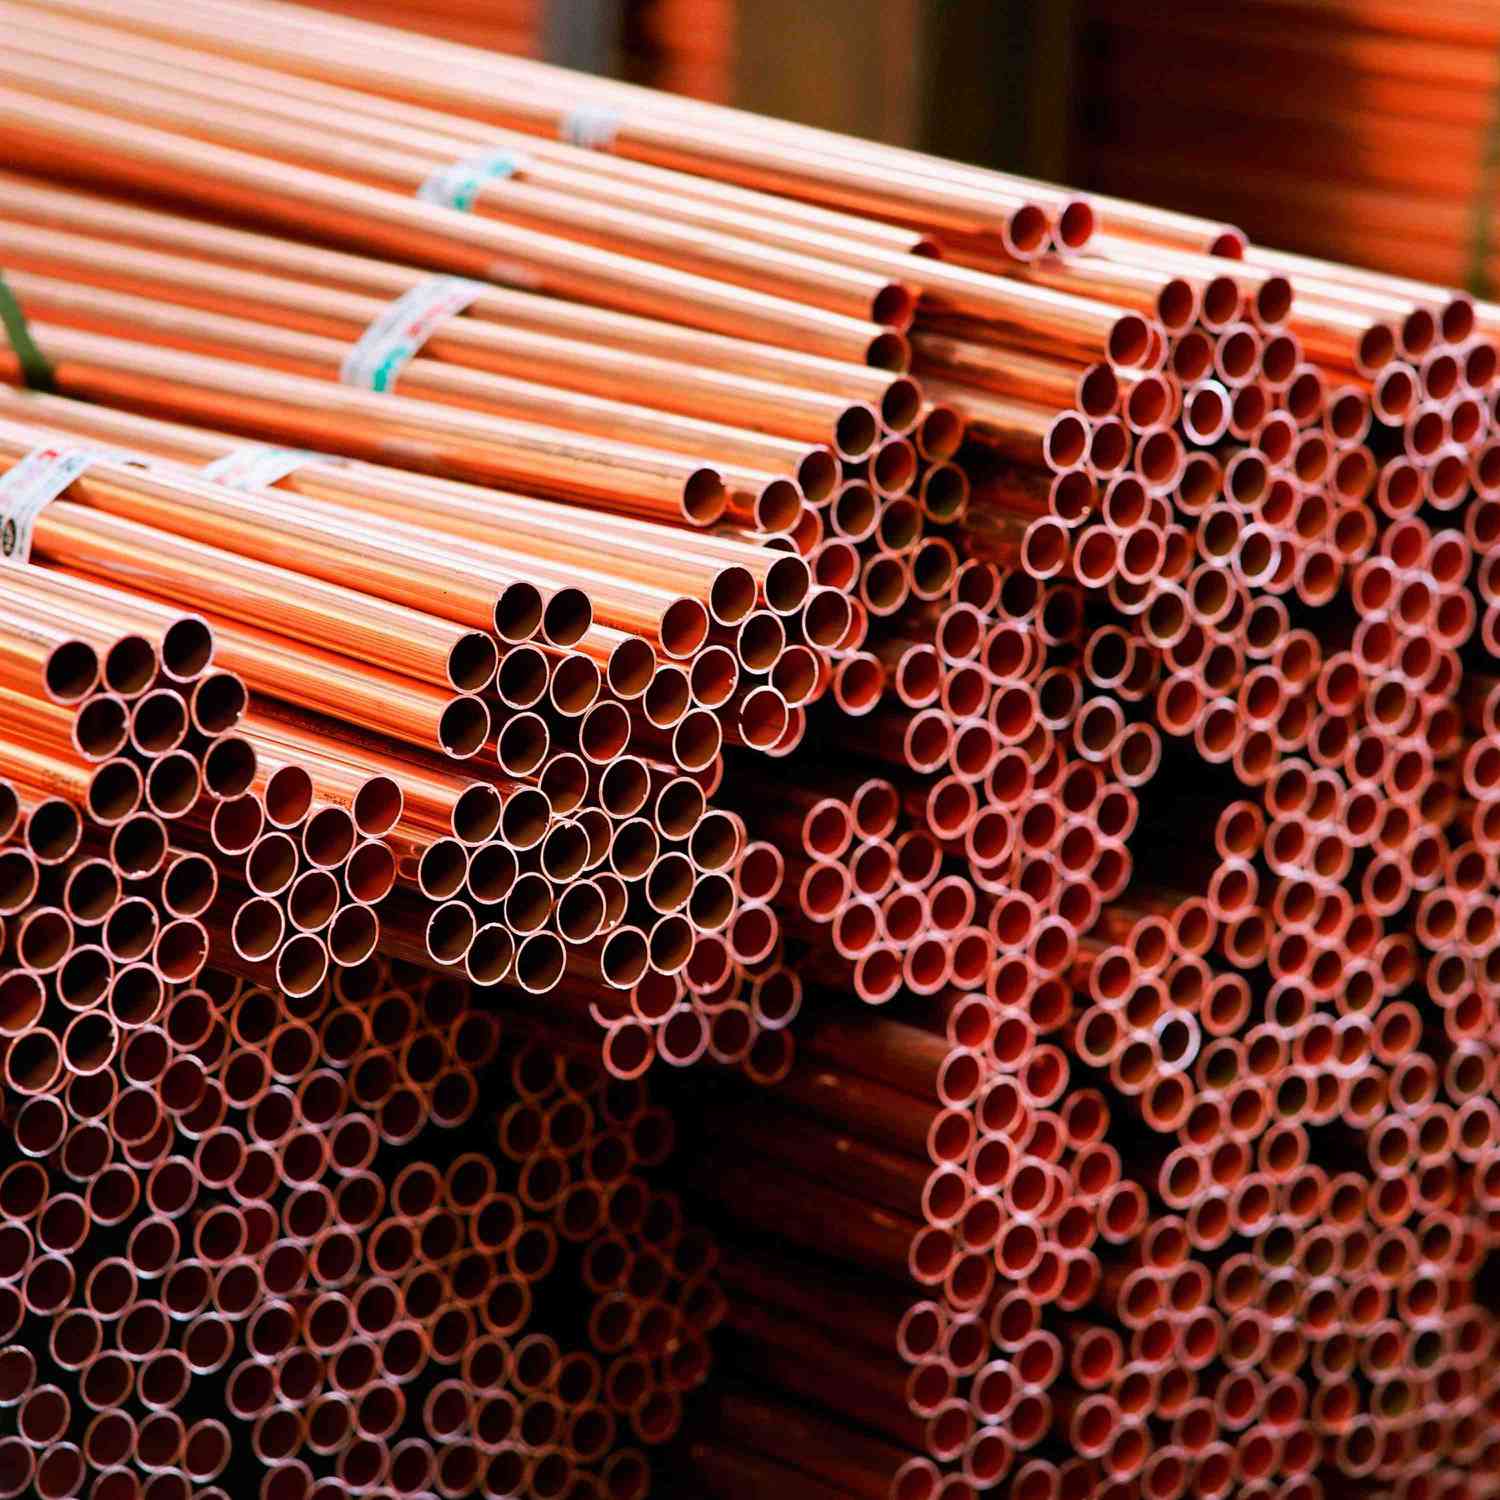 How Is Copper Used In Construction